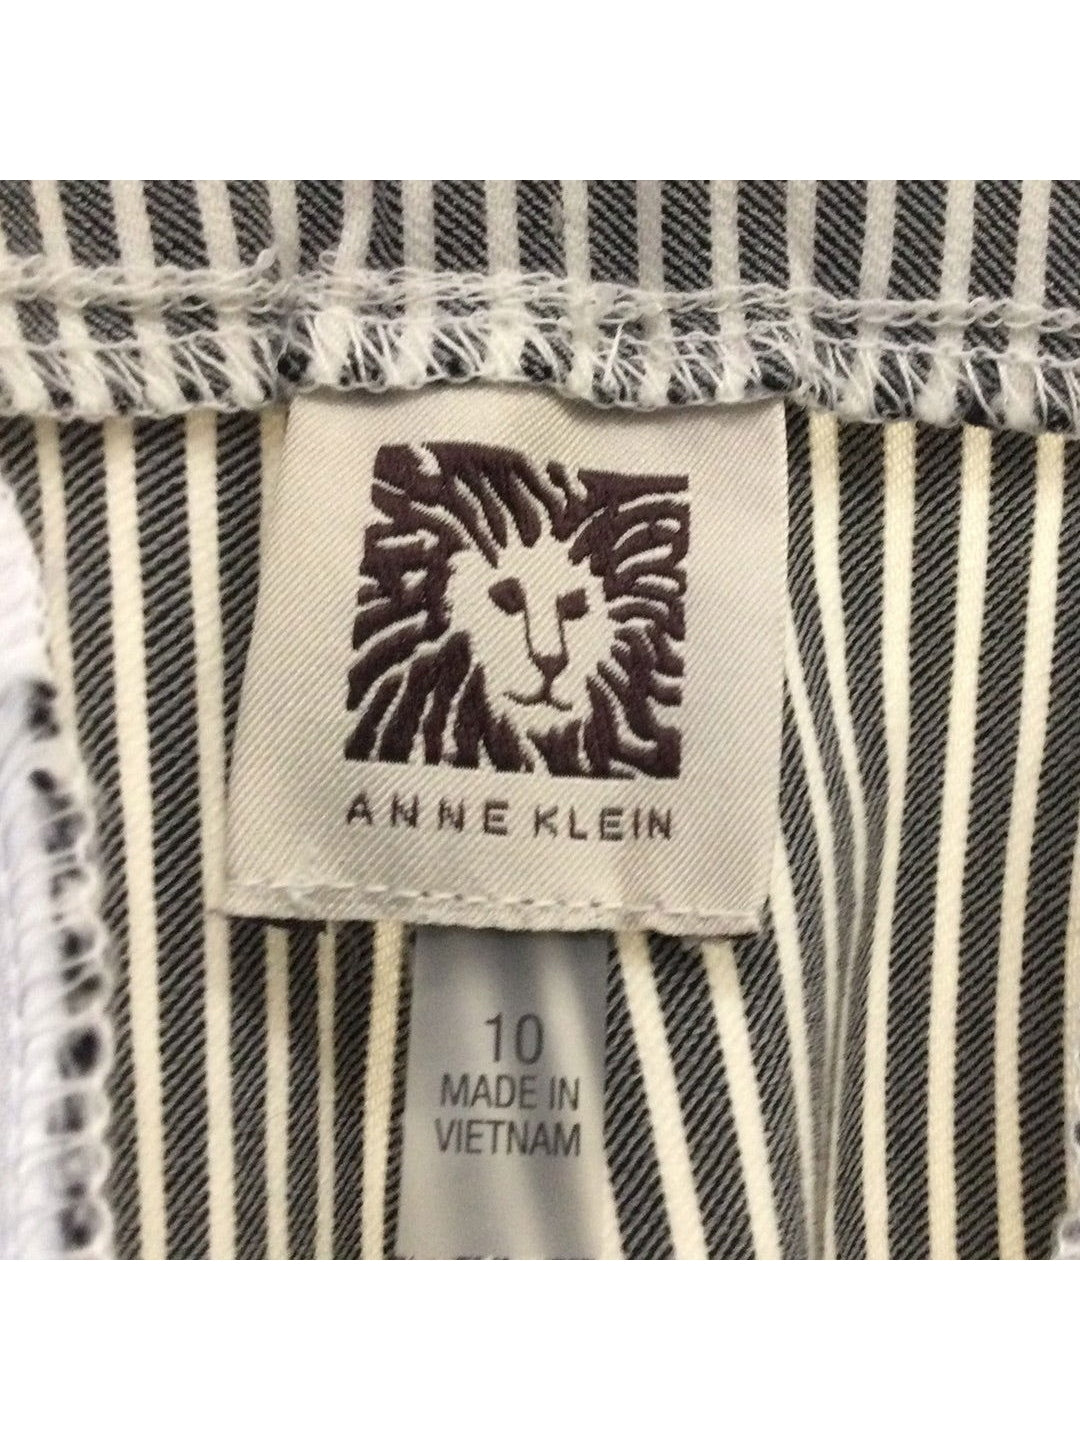 Anne Klein Women's Pants - The Kennedy Collective Thrift - 